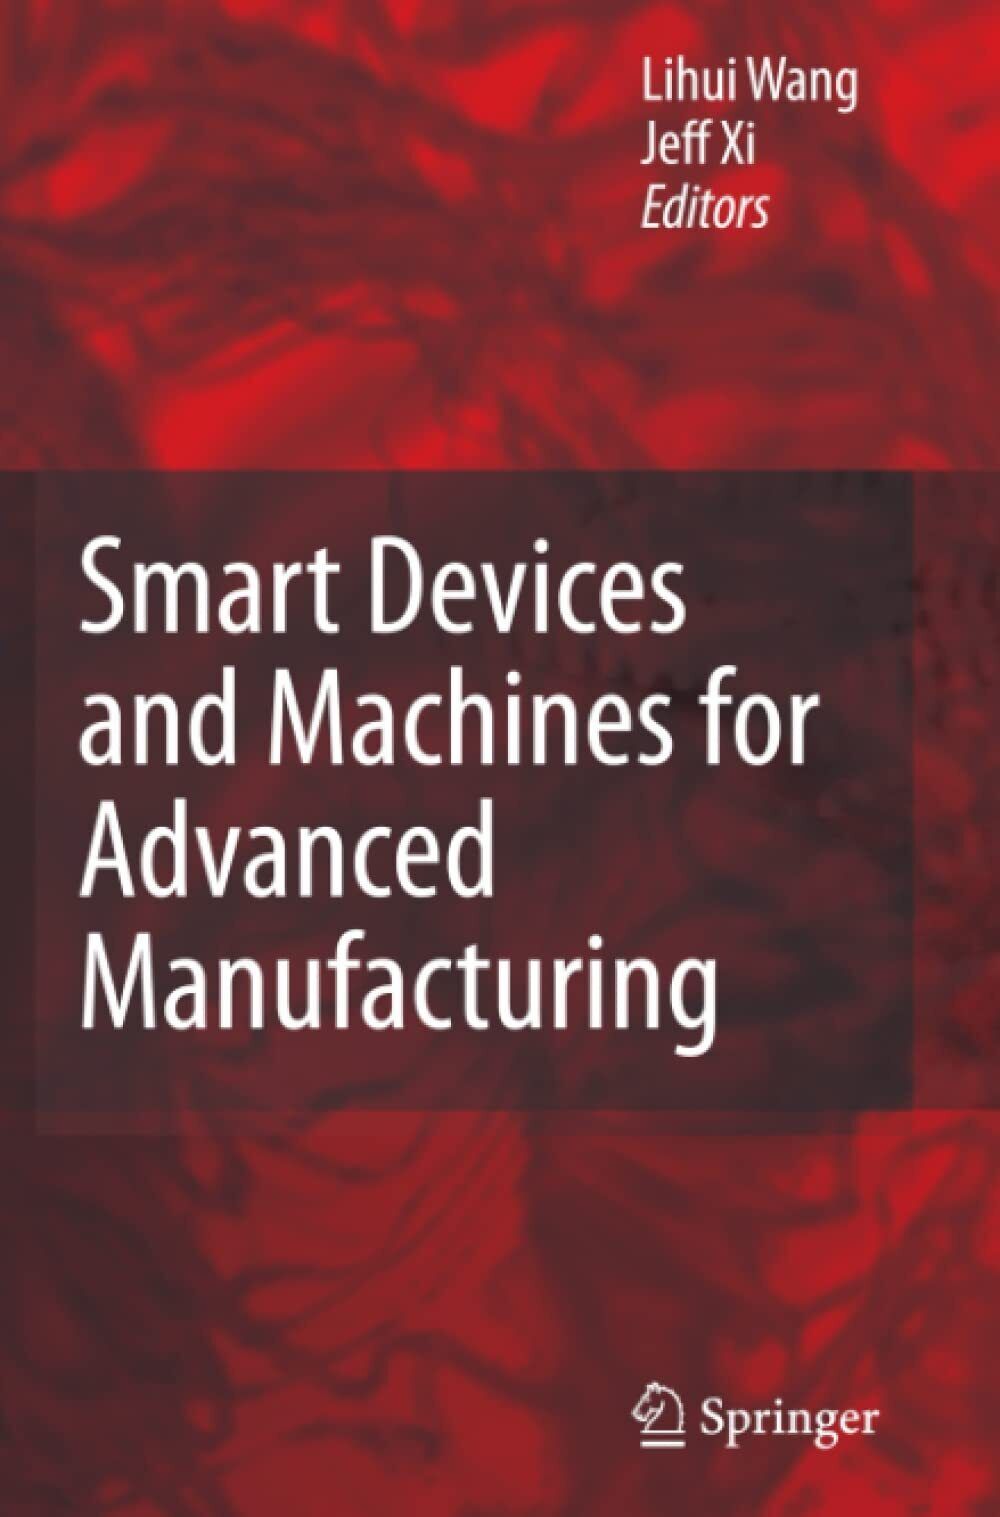 Smart Devices and Machines for Advanced Manufacturing - Lihui Wang-Springer,2010